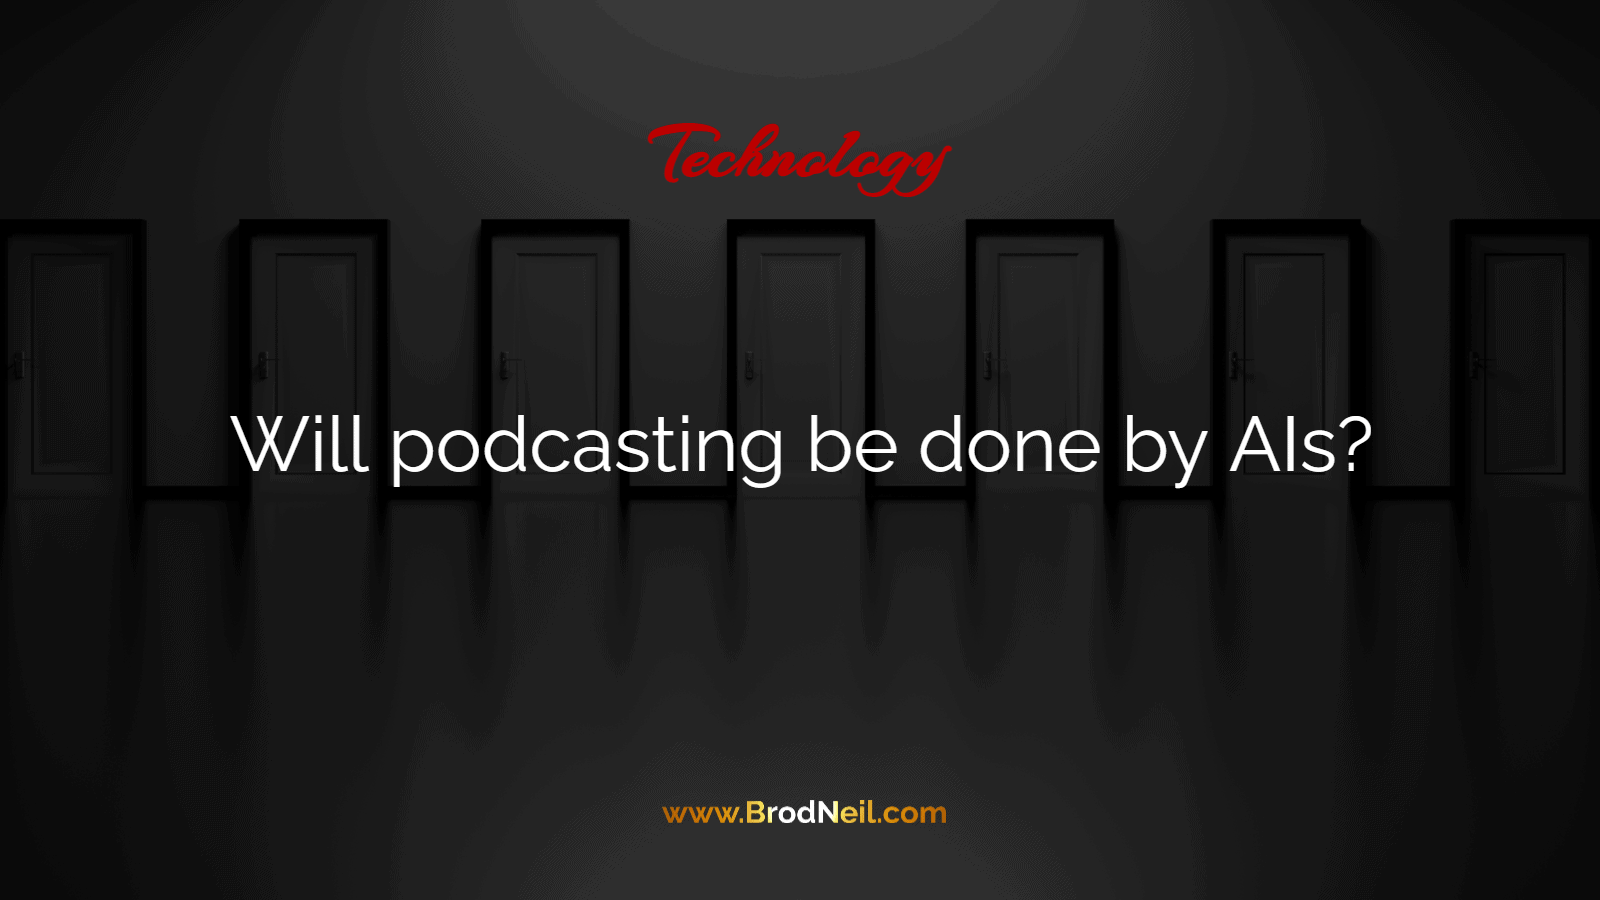 Will podcasting be done by AIs?